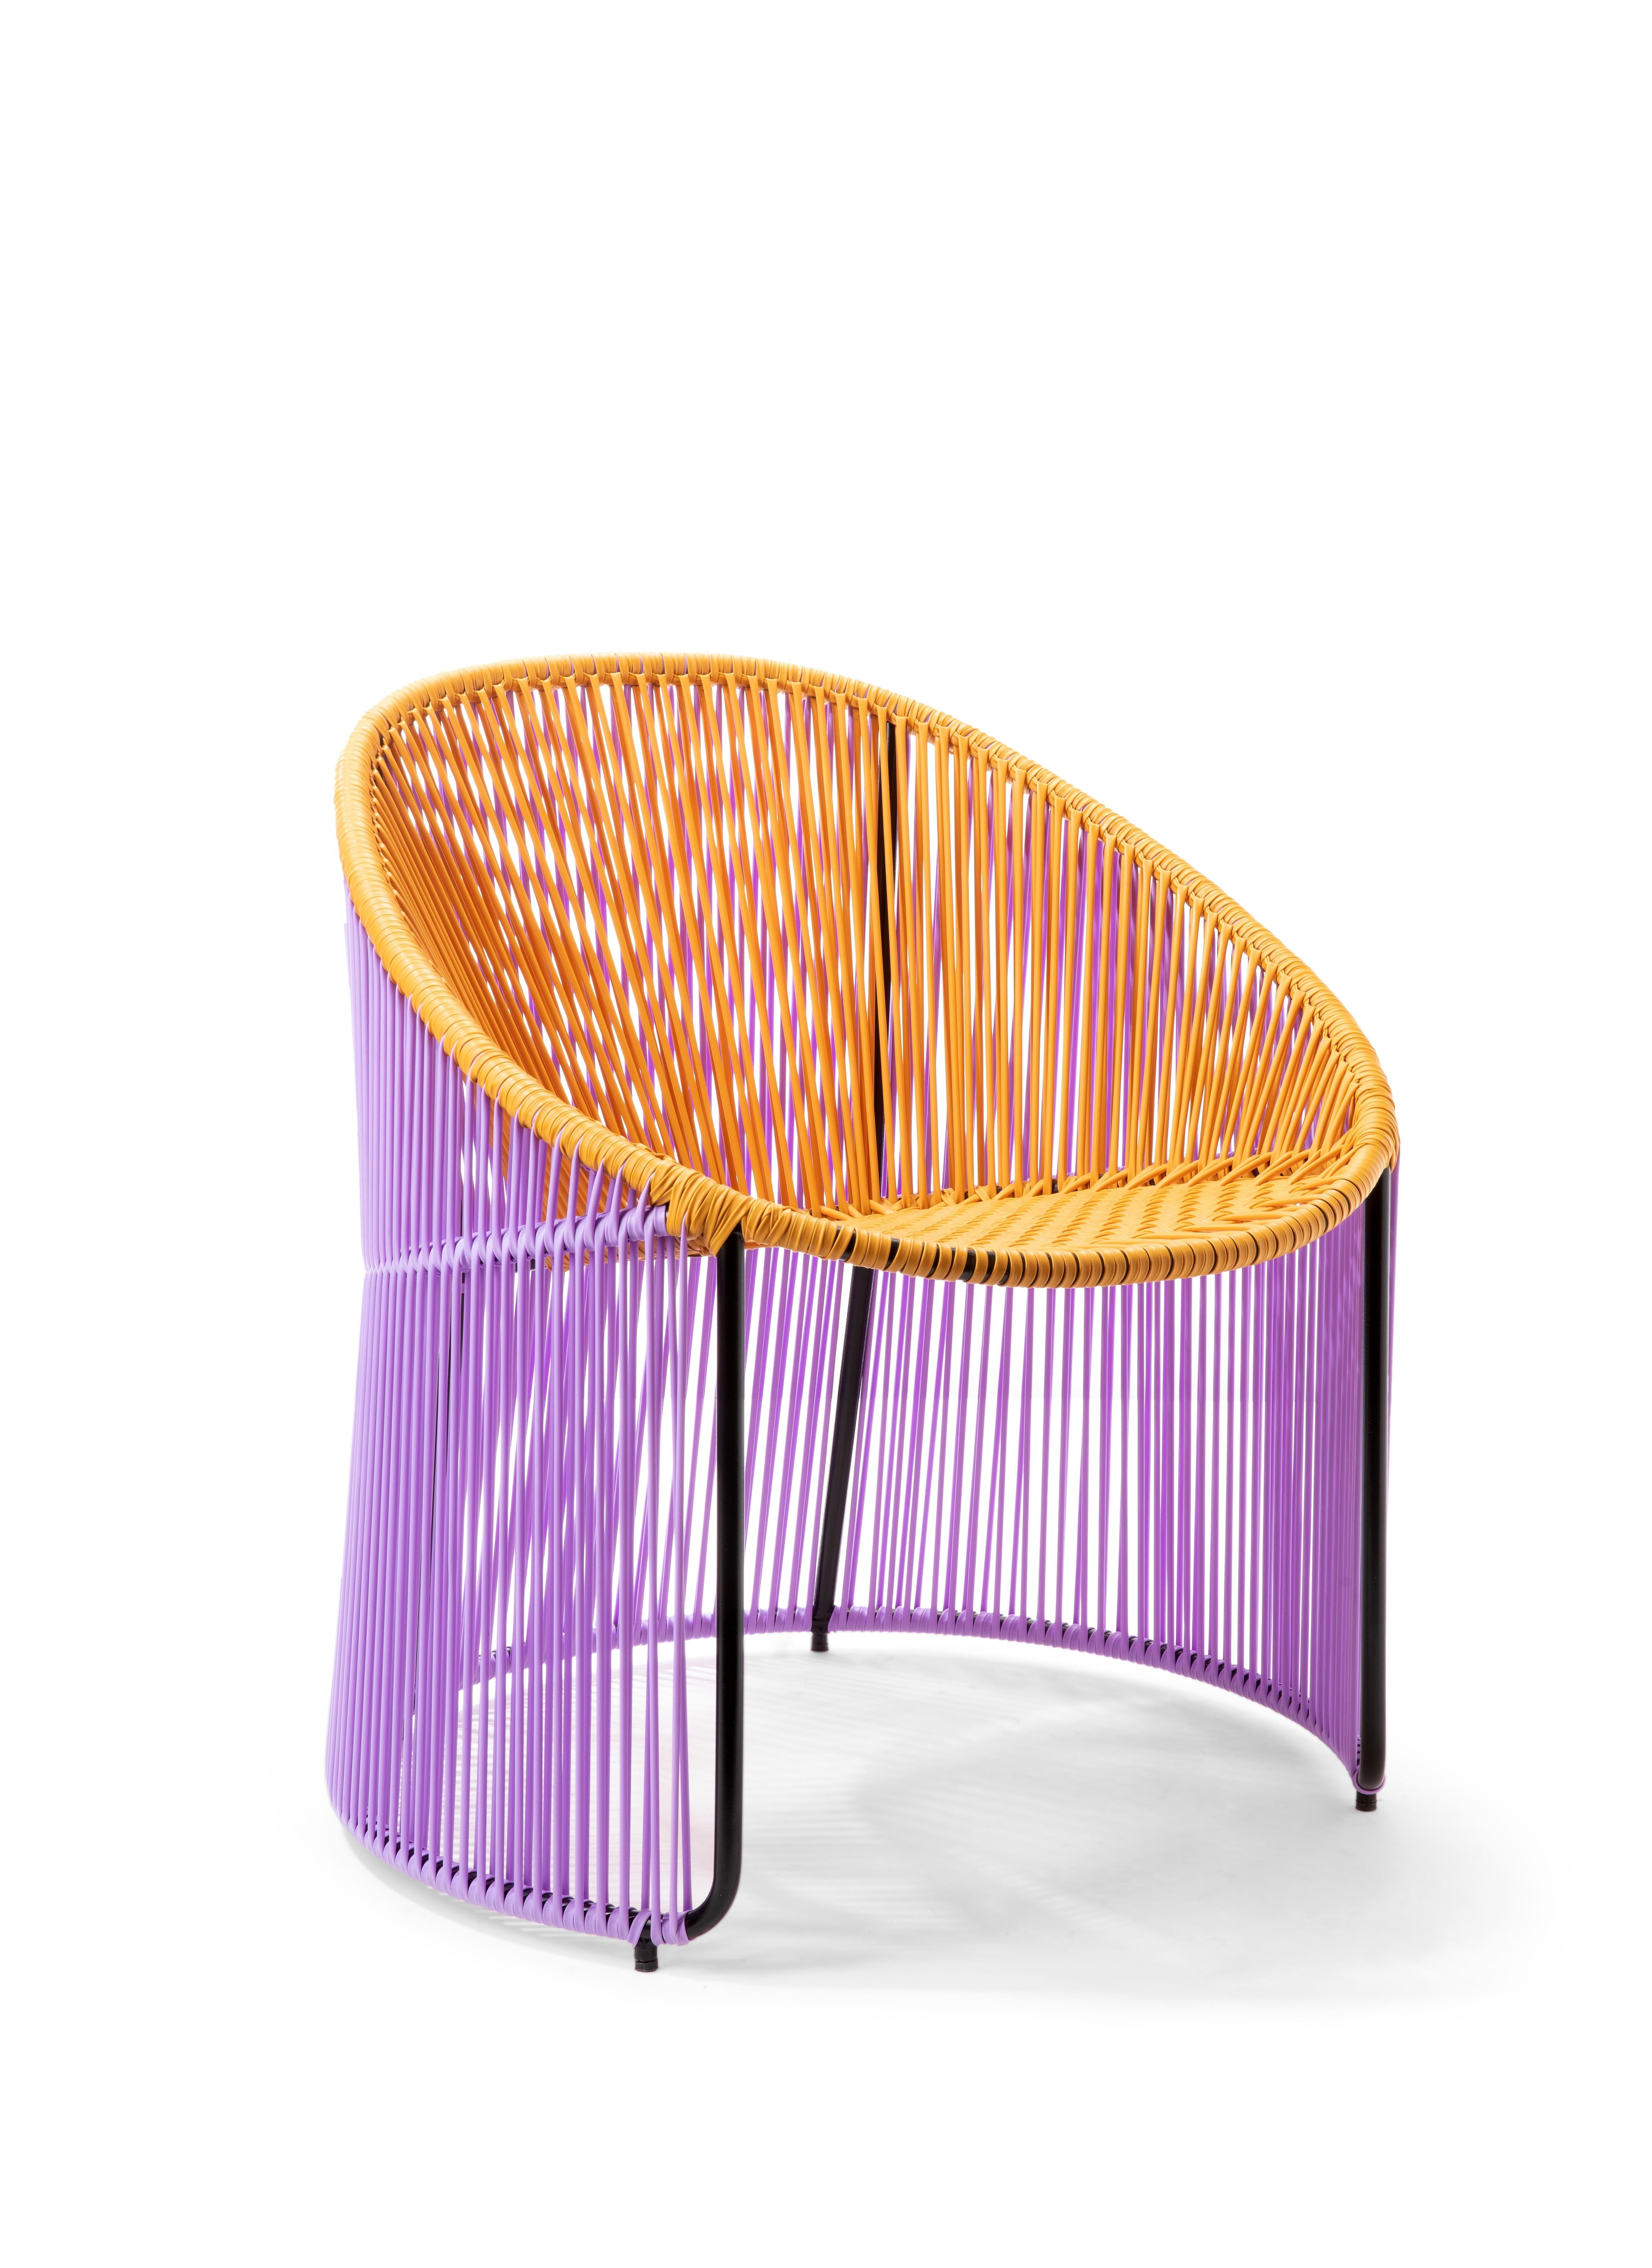 Set of 2 Honey Cartagenas lounge chair by Sebastian Herkner.
Materials: PVC strings. Galvanized and powder-coated tubular steel frame
Technique: made from recycled plastic. Weaved by local craftspeople in Colombia. 
Dimensions: W 64 x D 70 x H 74